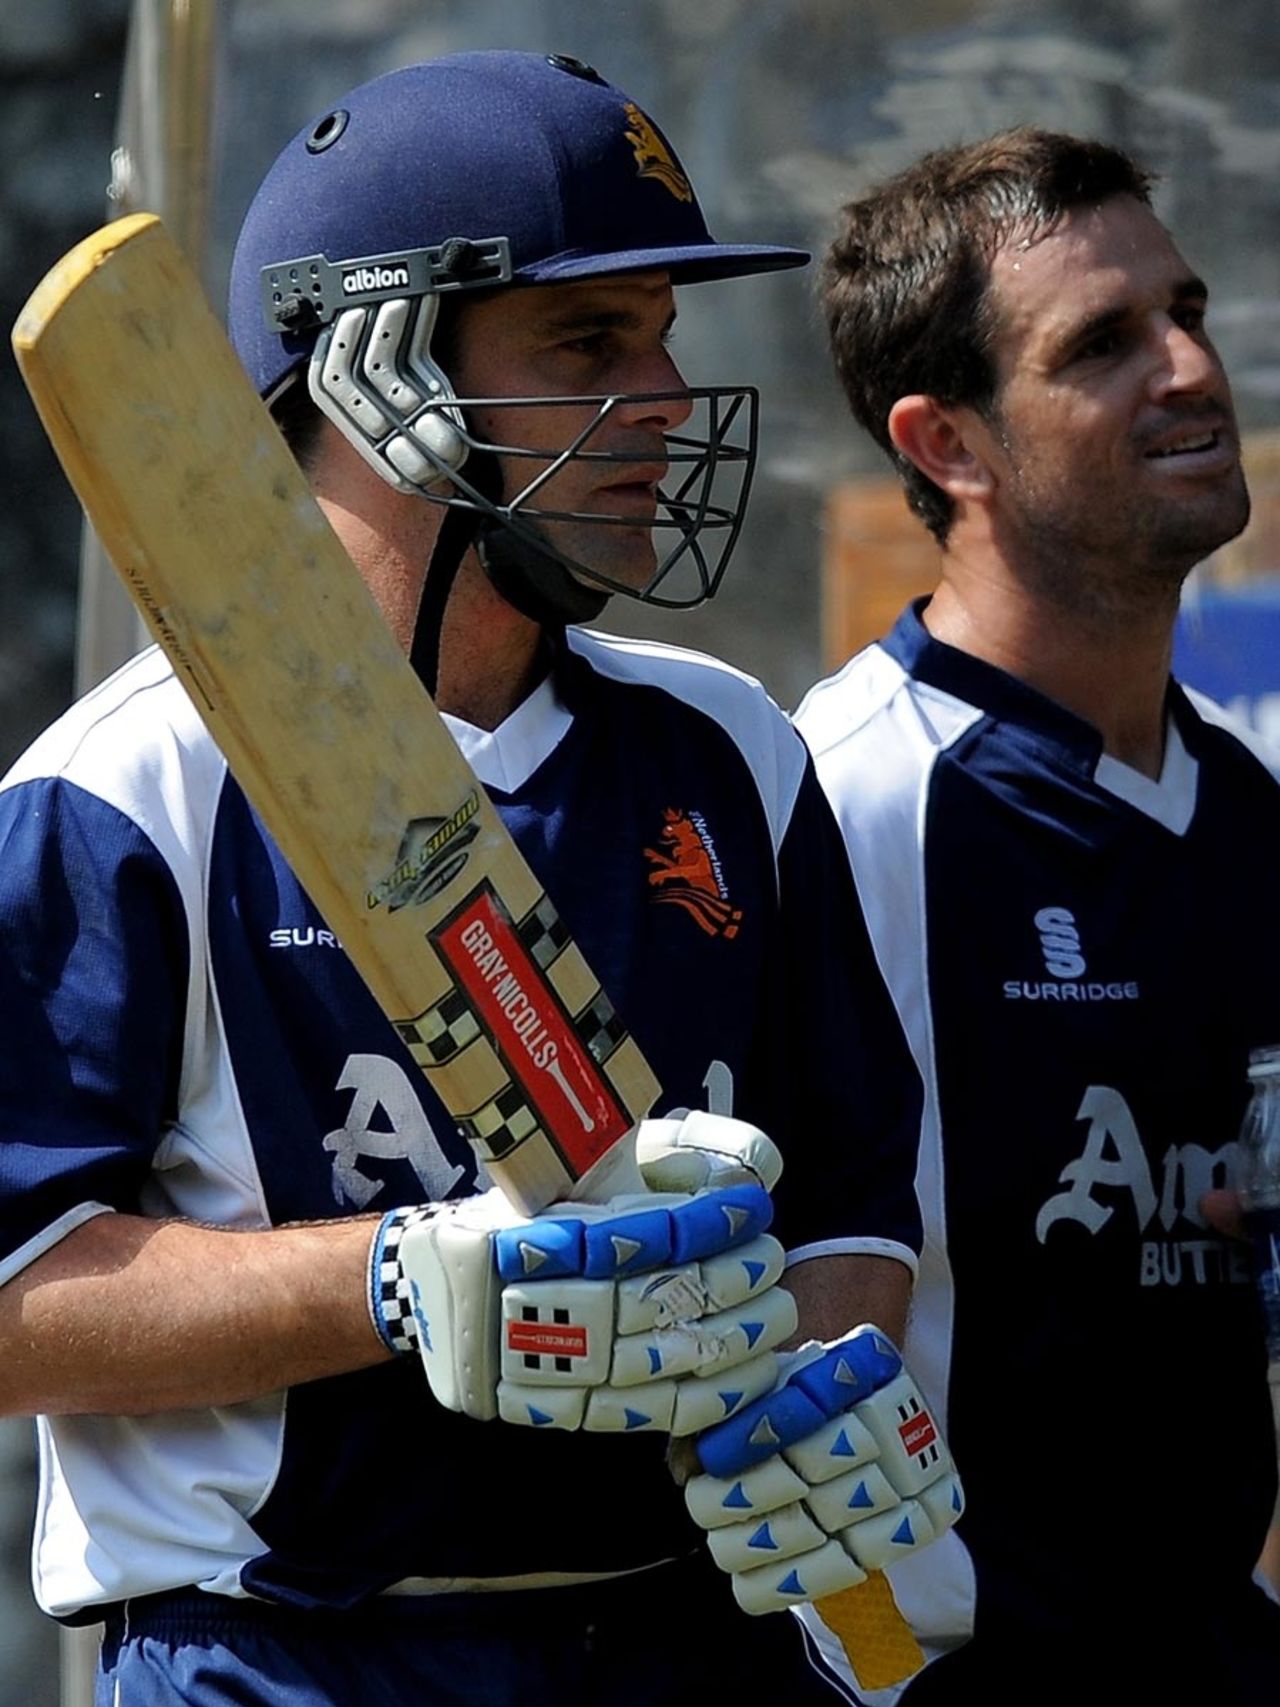 Netherlands captain Peter Borren and Ryan ten Doeschate at a training session, Delhi, February 27, 2011